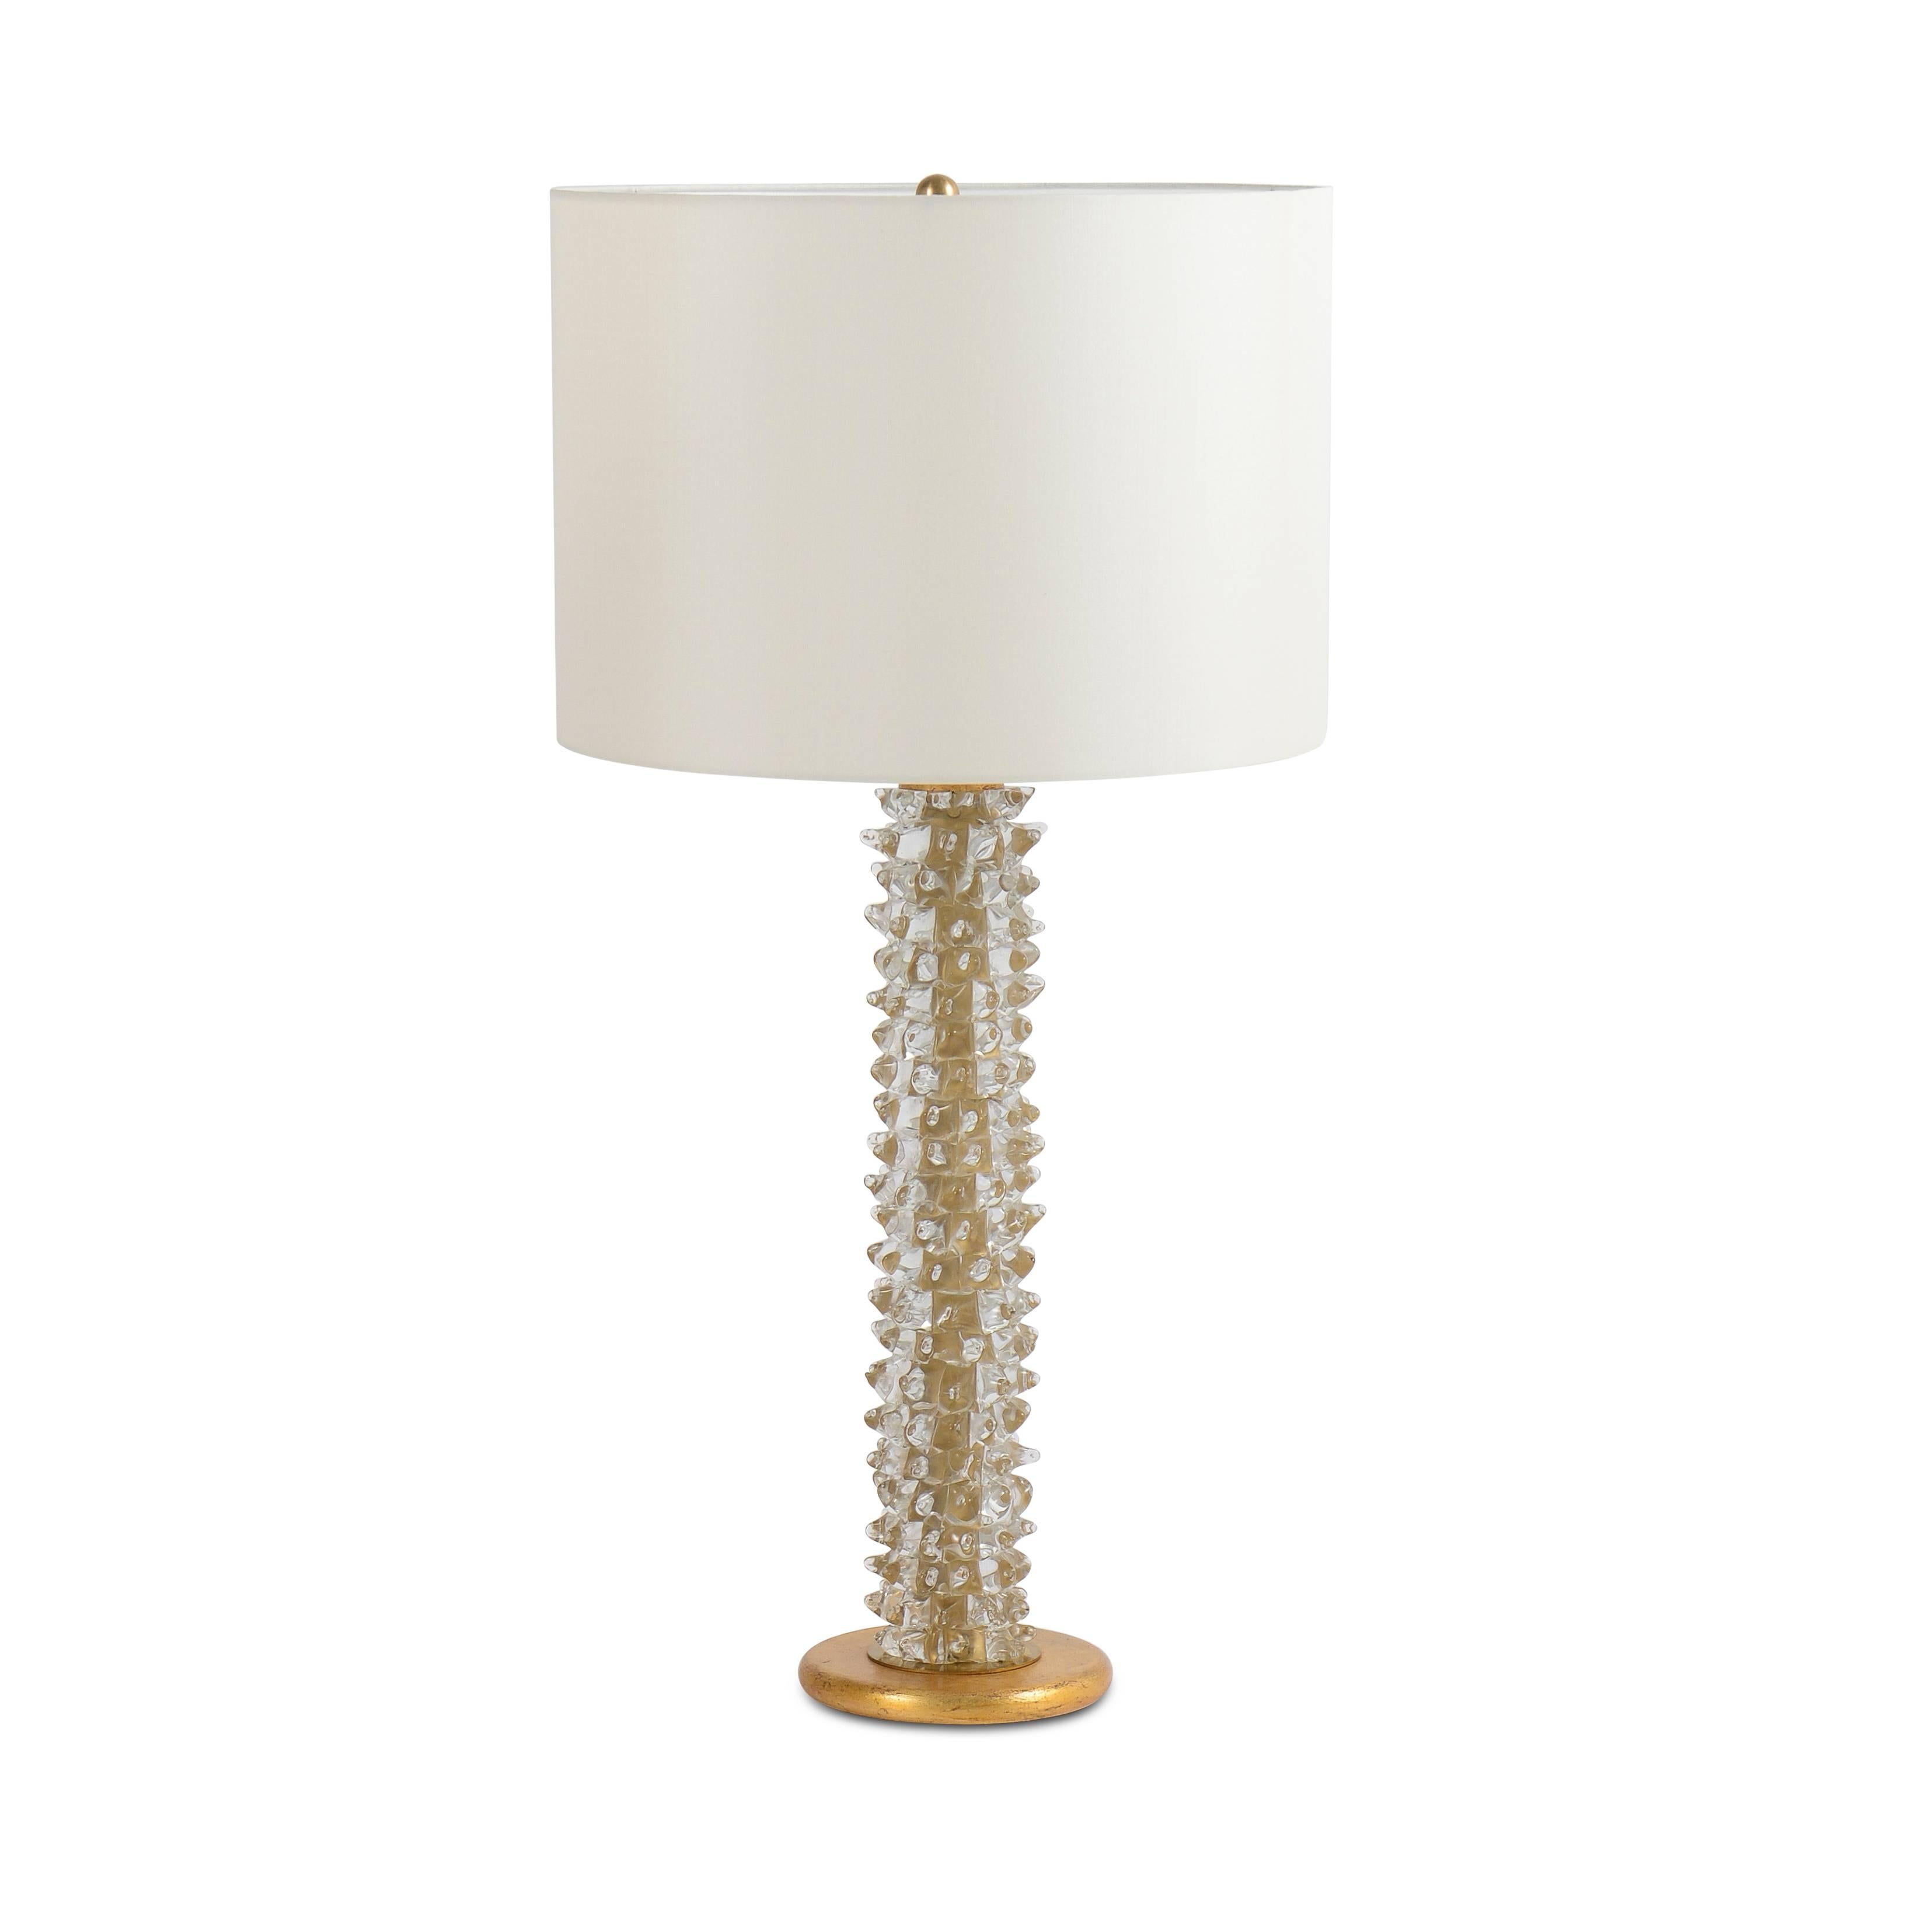 Pair of molded glass table lamps on round gilded stepped base.